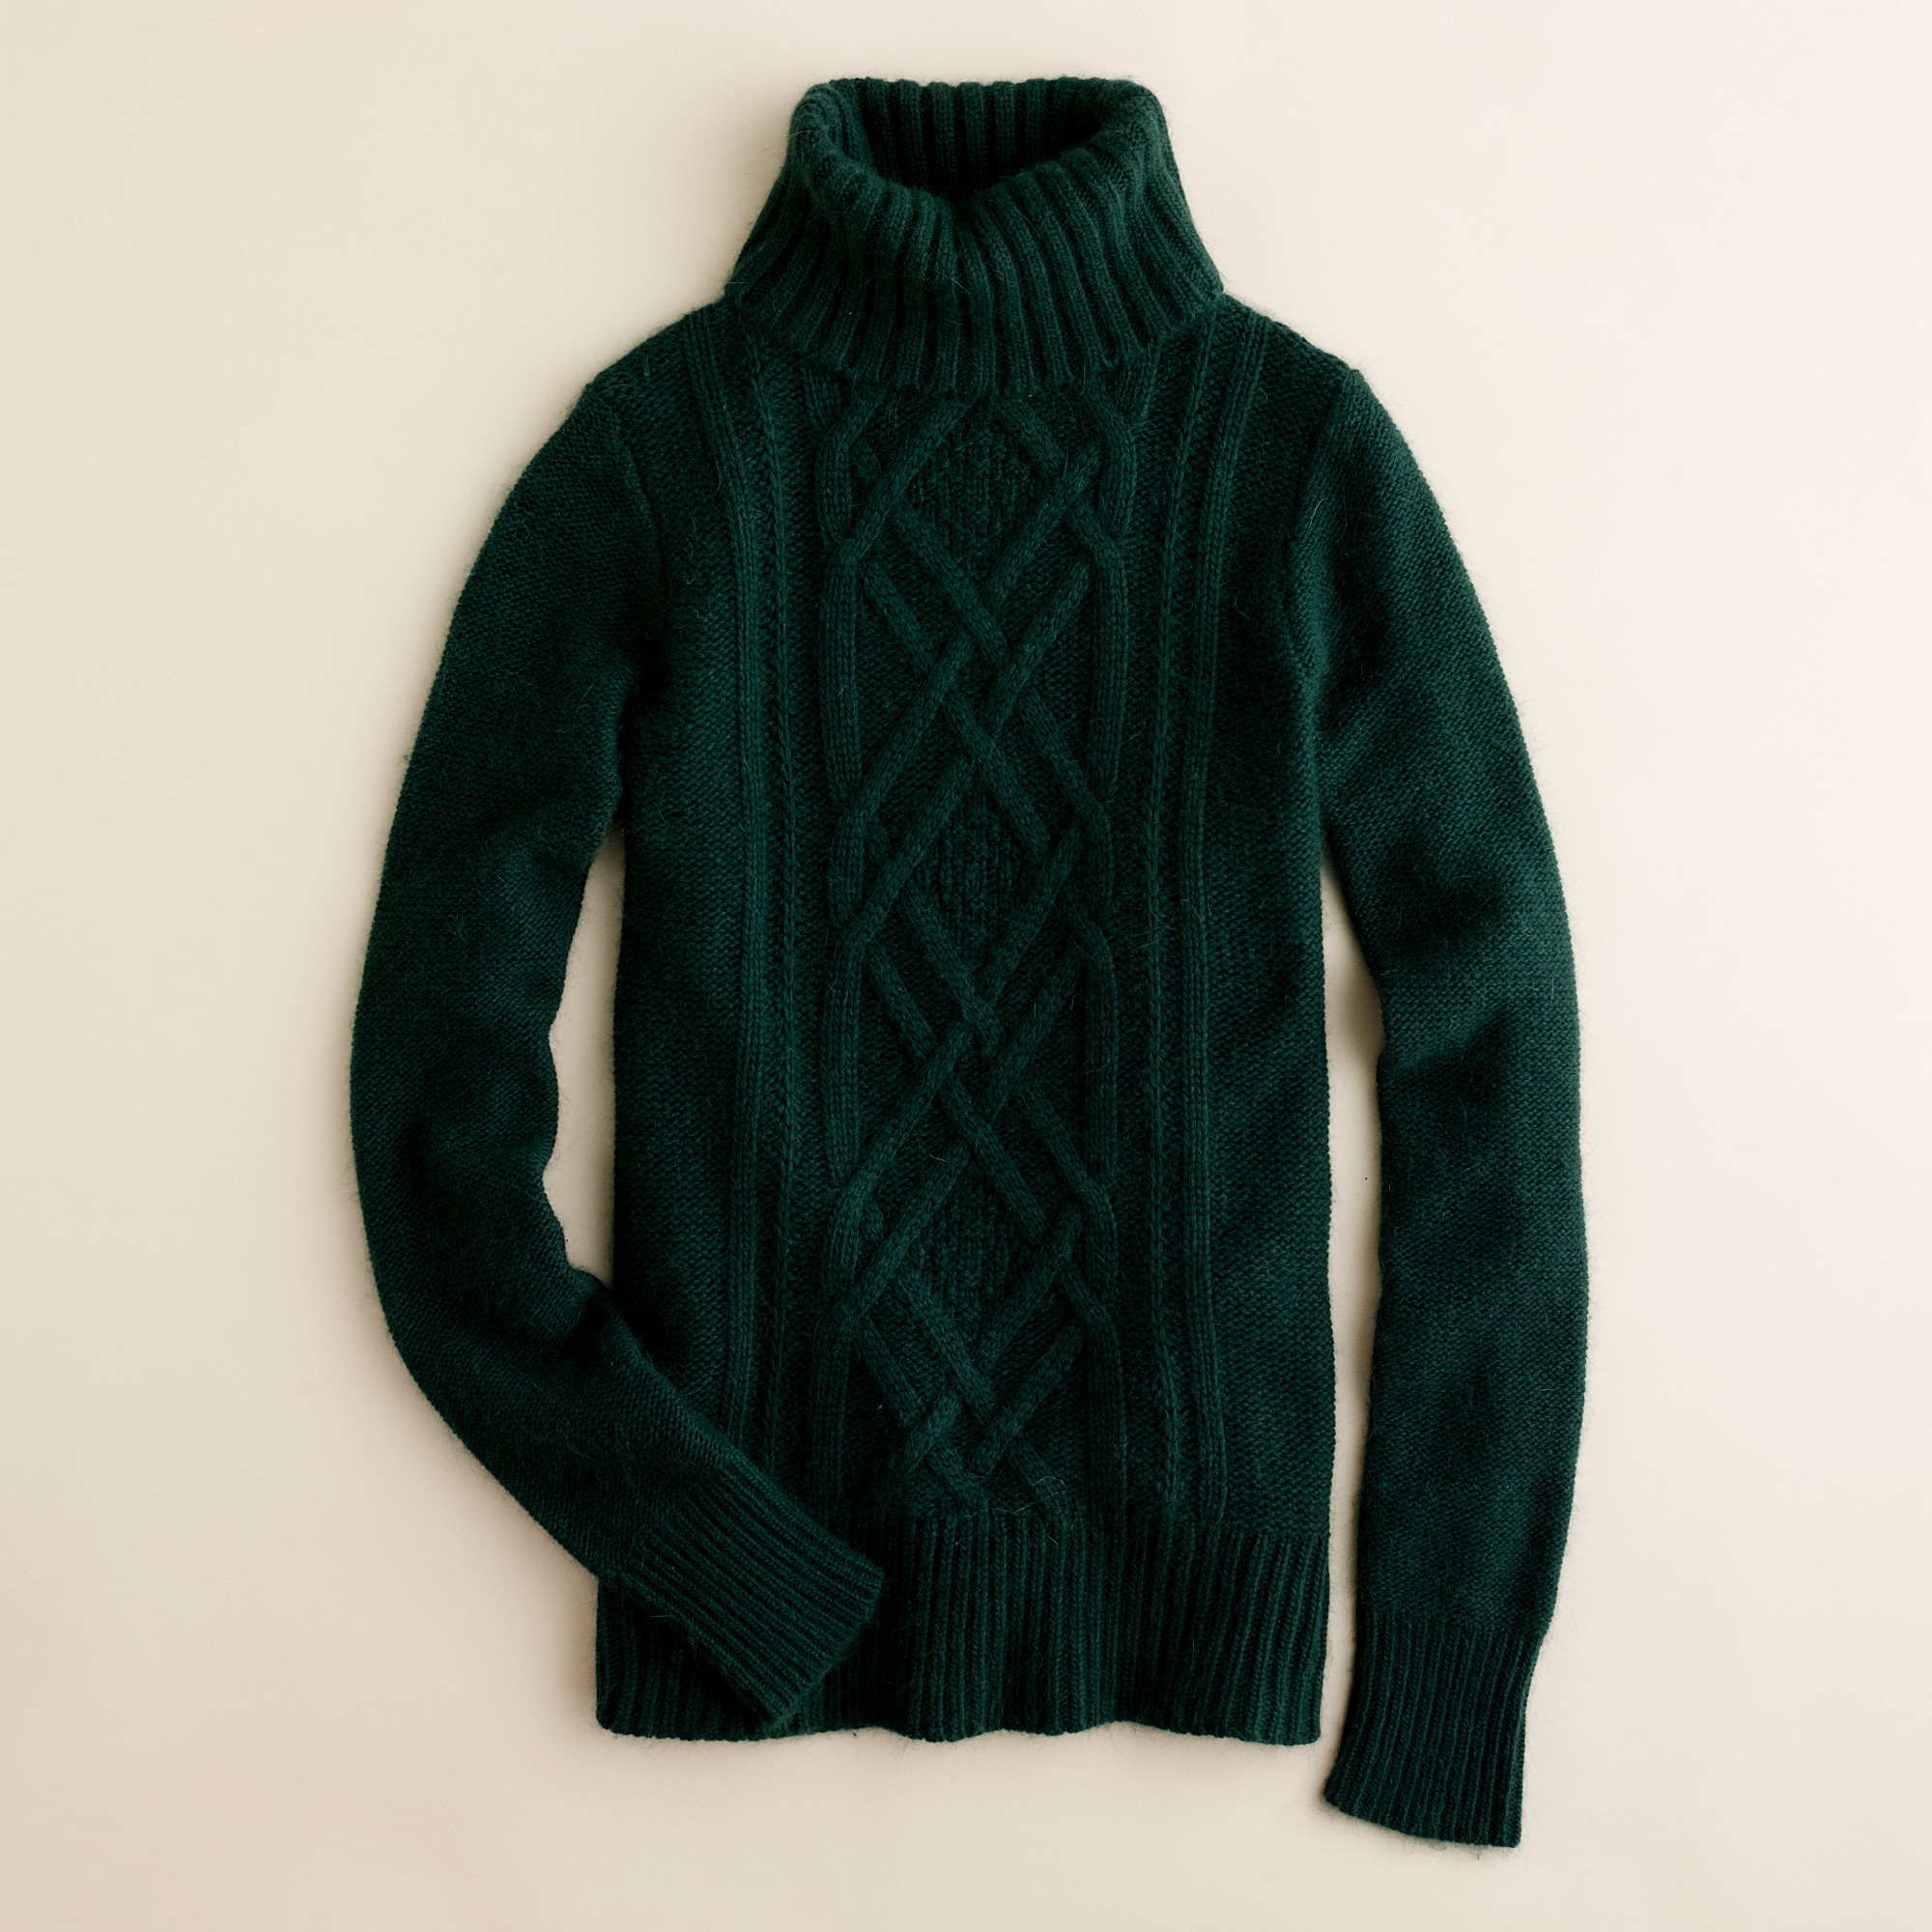 J.crew Cambridge Cable Turtleneck Sweater in Green | Lyst